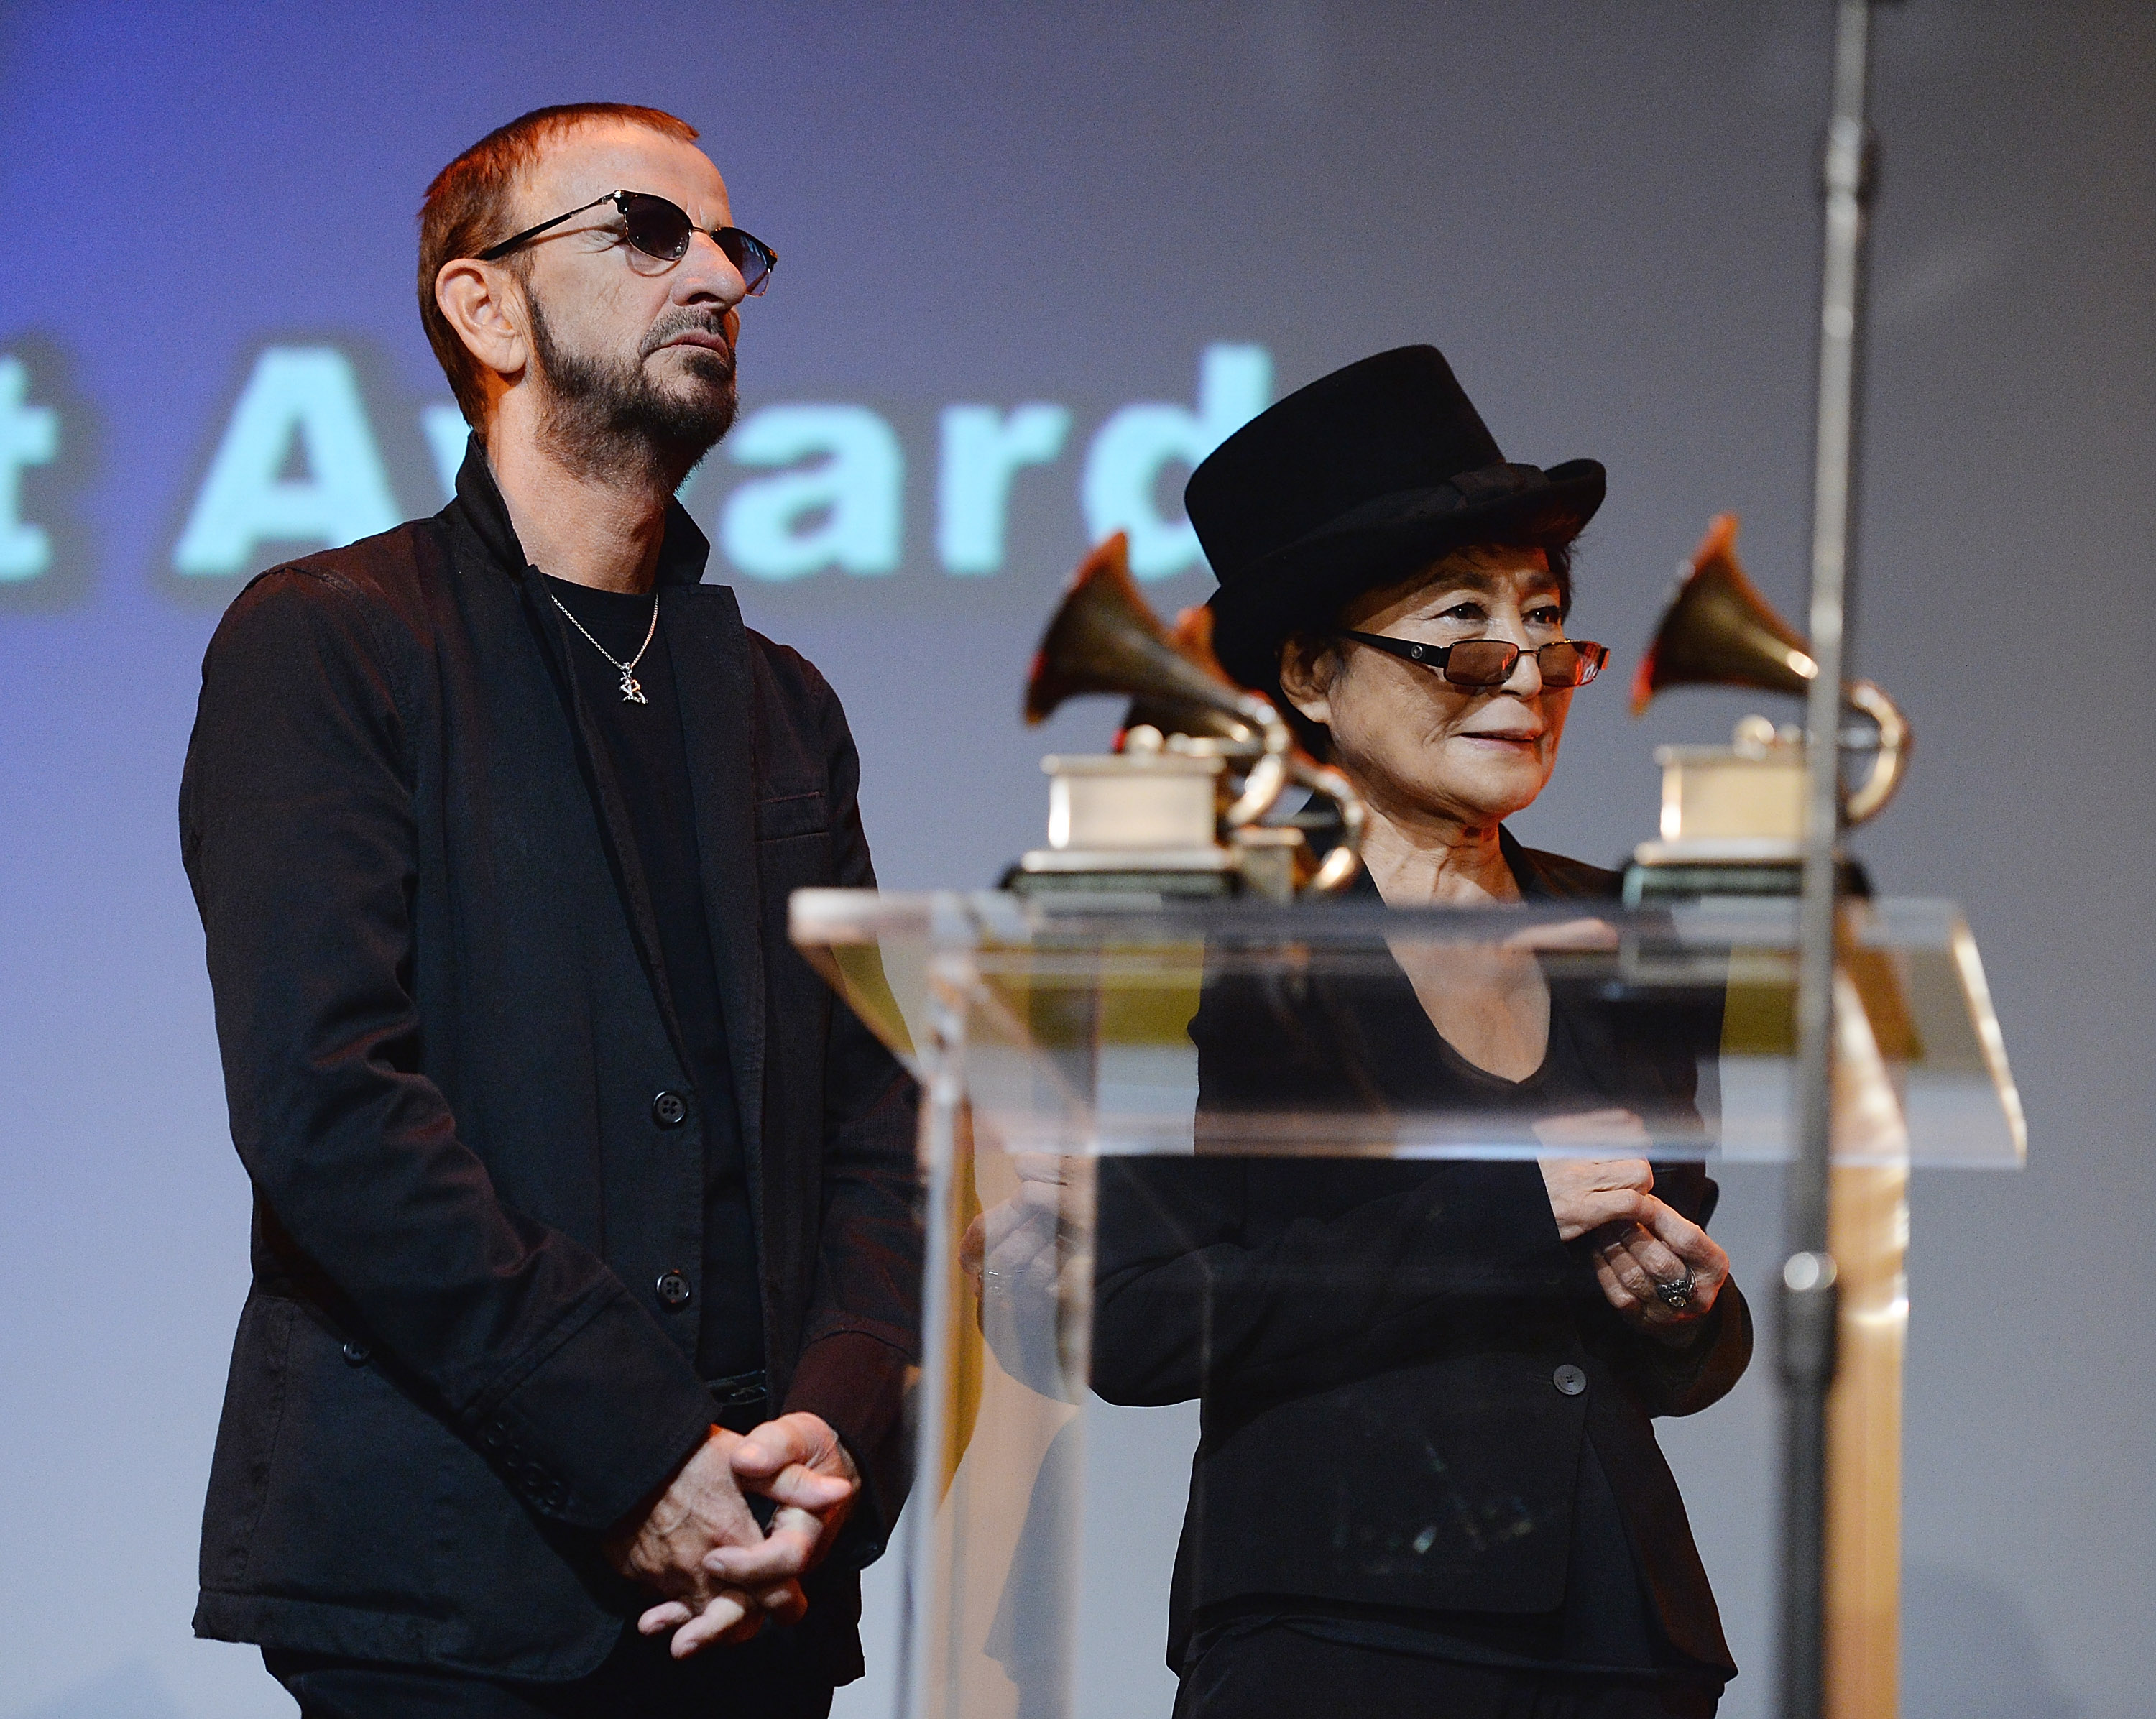 Ringo Starr and Yoko Ono onstage at the 2014 Grammy Awards